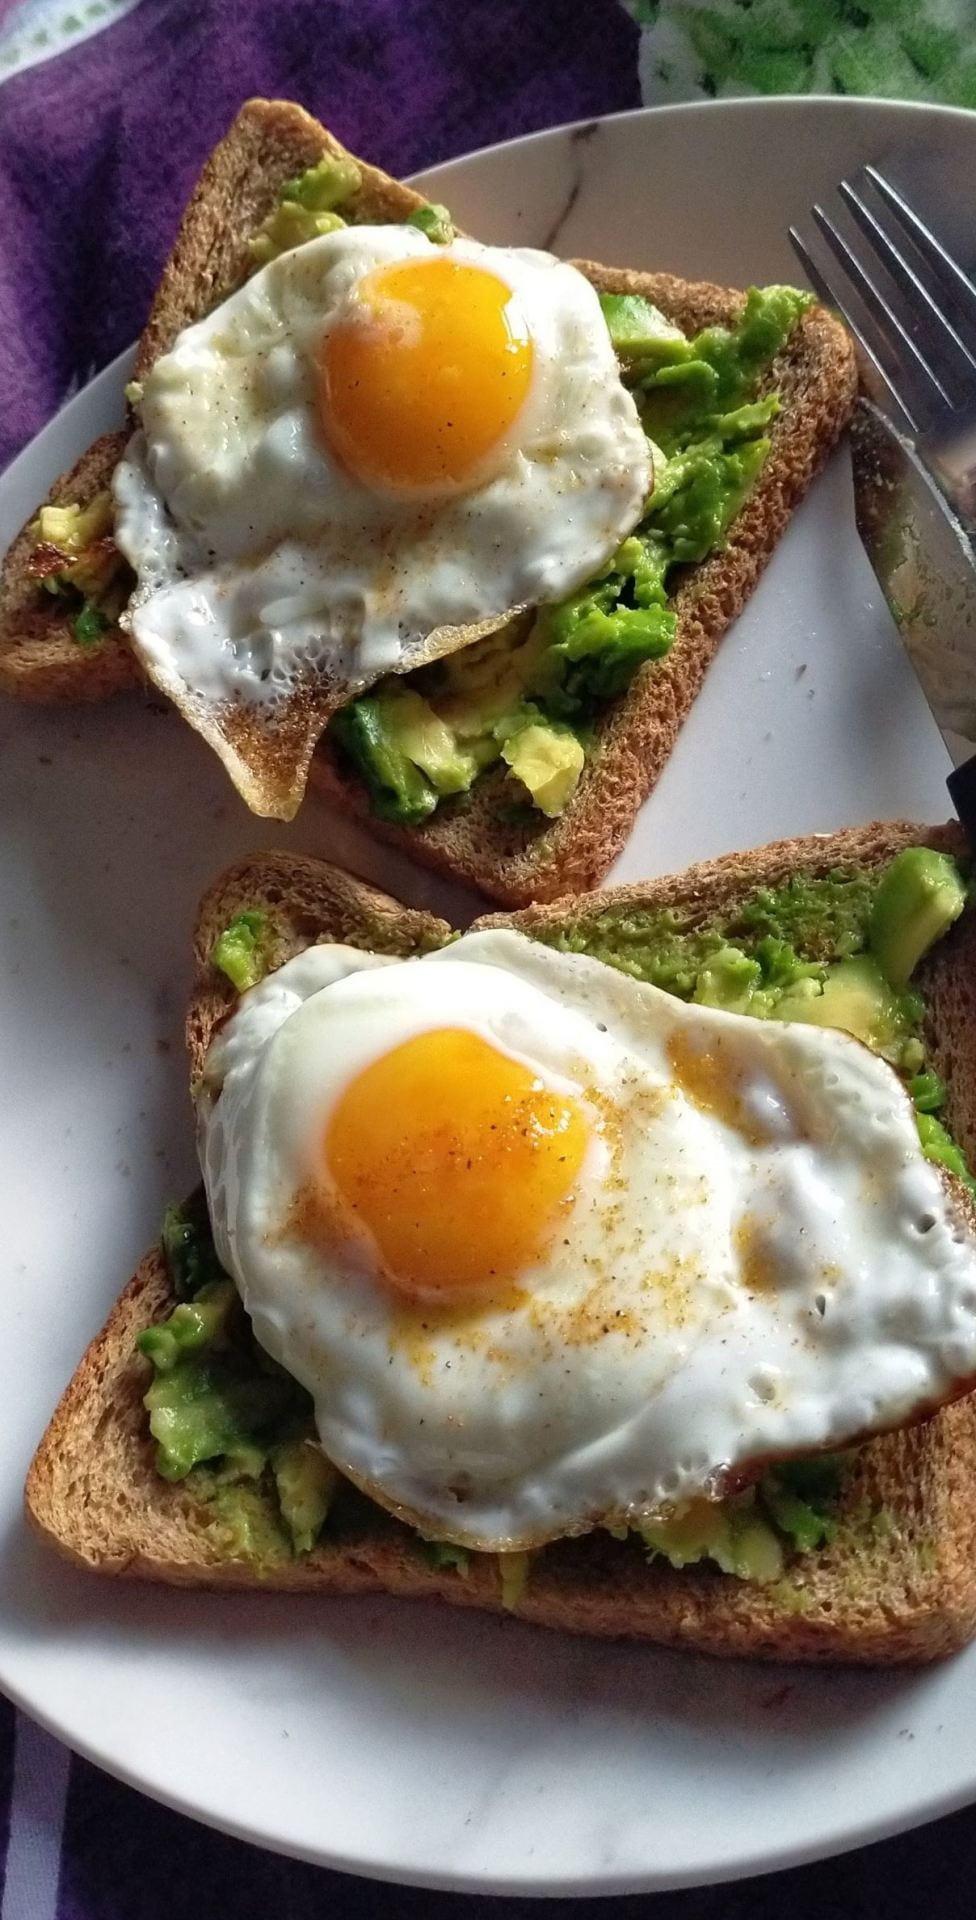 Two slices of toast with smashed avocado and a fried egg on top of them.